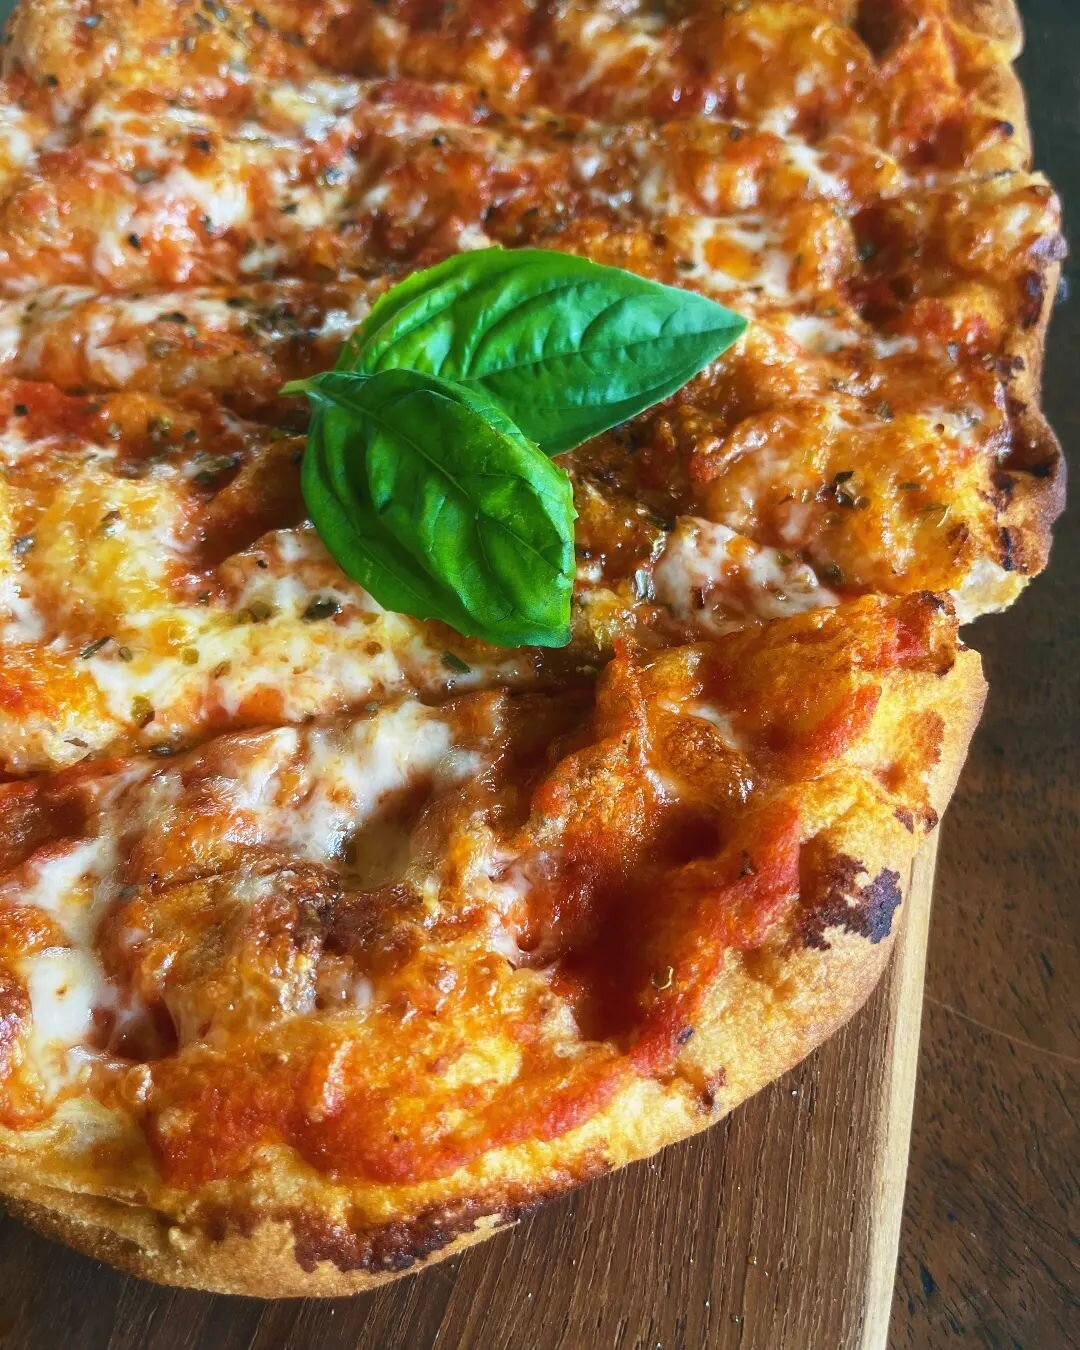 It's already your favorite 😍 

Come and try it even if you don't stay at Mule Malu, you won't regret this truly original Italian artisan pizza 😋
Available daily from 12pm

#pizza #italiana #mulemalu #tropicalstay #bingin

Thanks @maurogatti for the